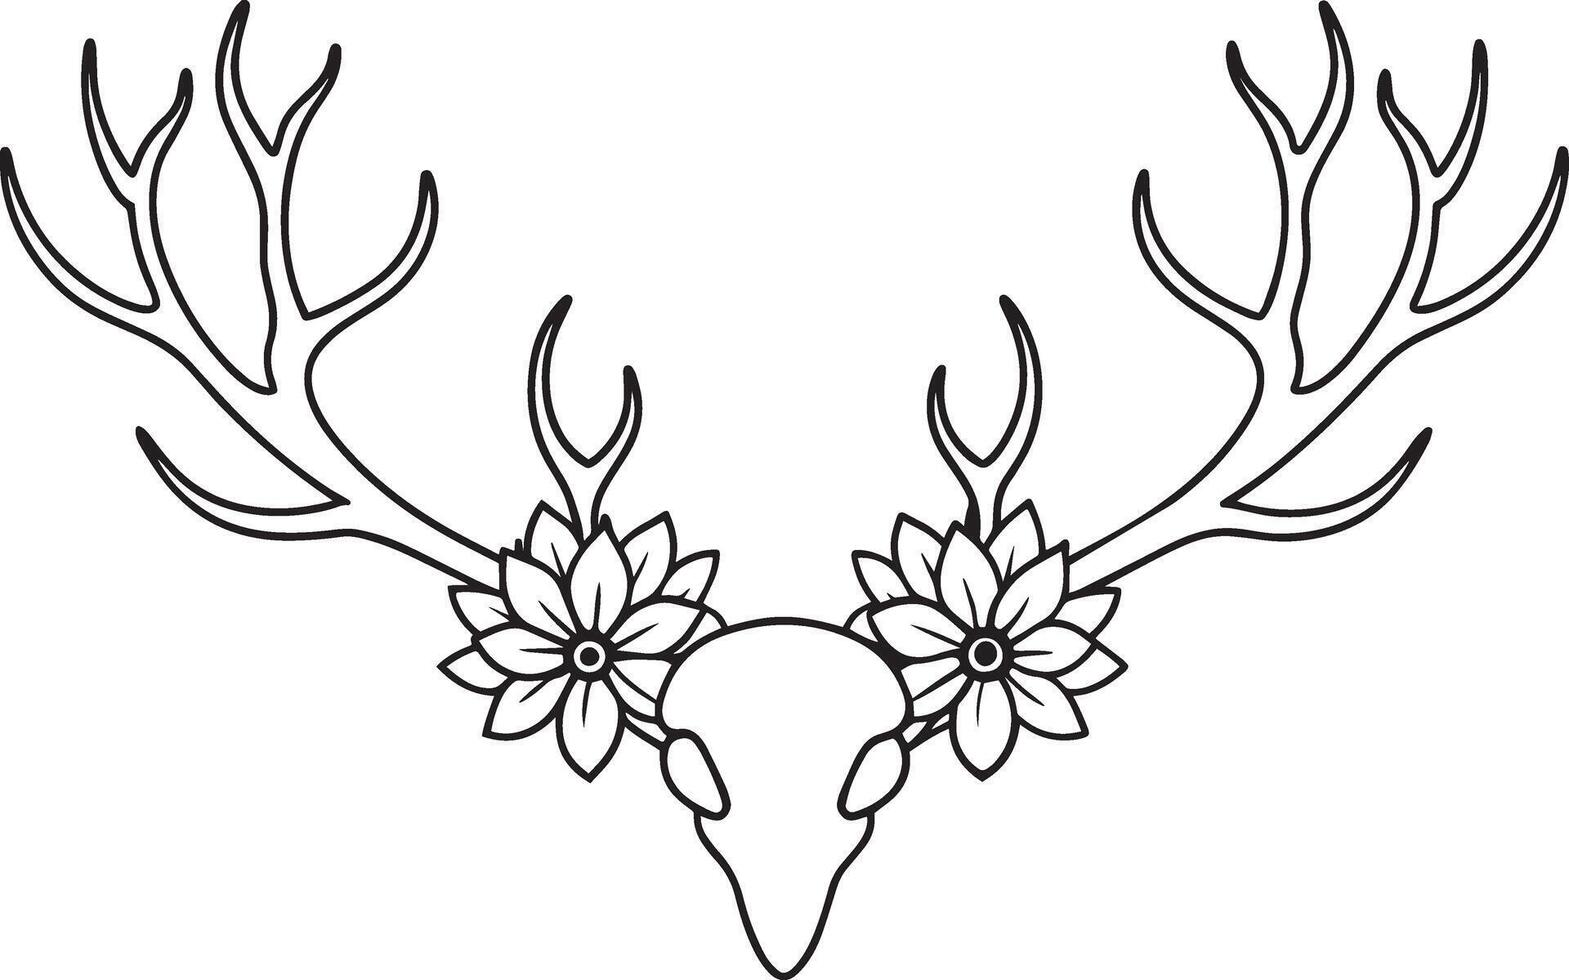 Deer head with horns design, Animal zoo life nature and fauna theme illustration vector